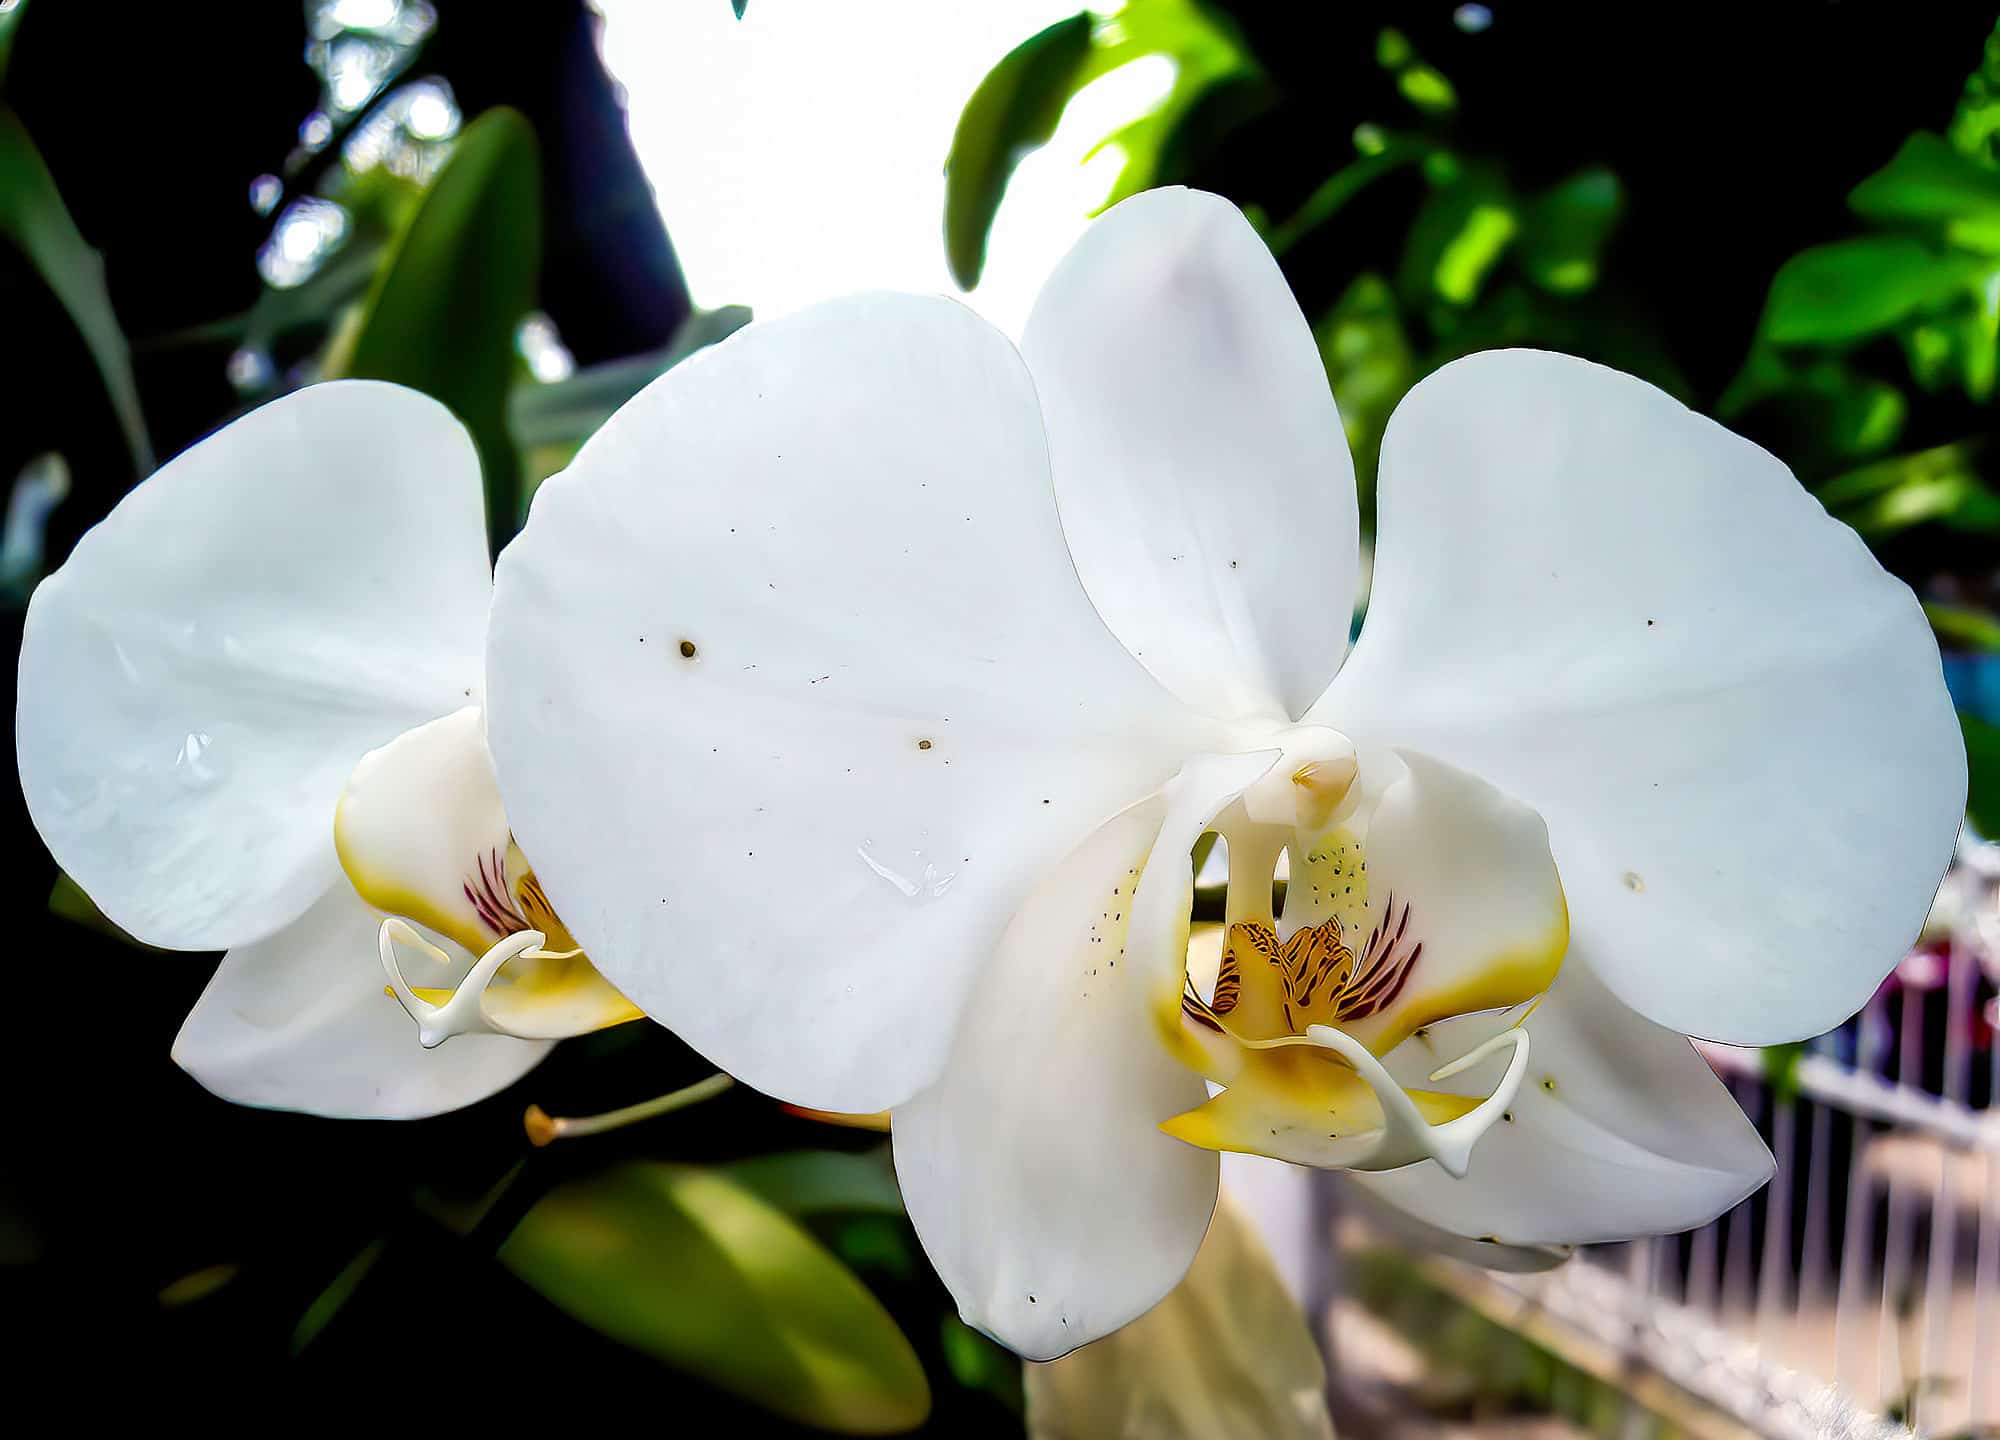 Discover the National Flower of Indonesia: Moon Orchid